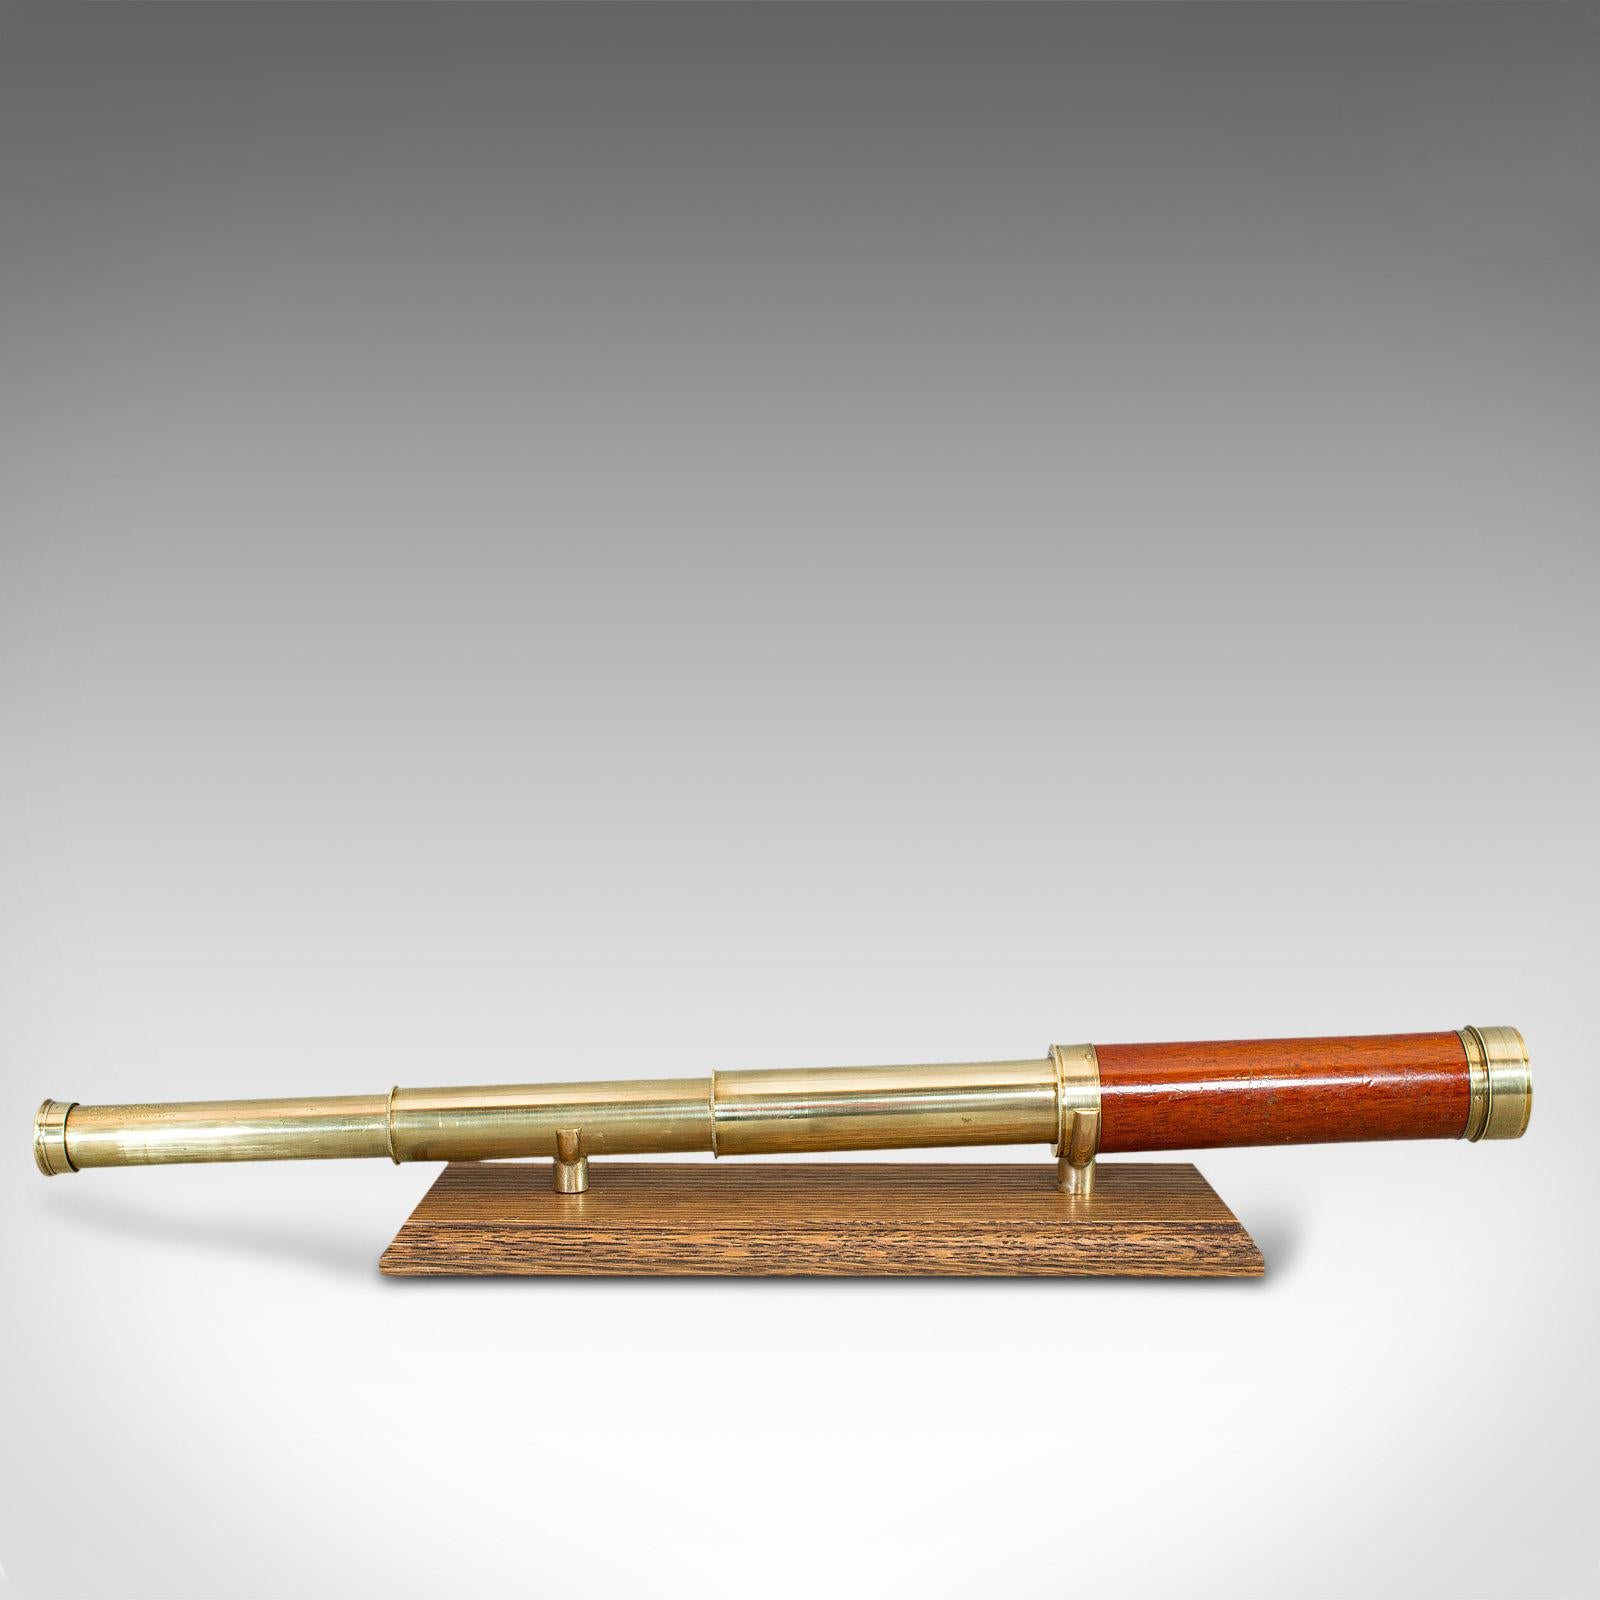 This is an antique 3-draw refractor. An English, terrestrial and astronomical telescope by Matthew Berge, dating to the Georgian period, circa 1805.

Perfect for bird watching, landscape appreciation, wildlife, or maritime observation. Equally